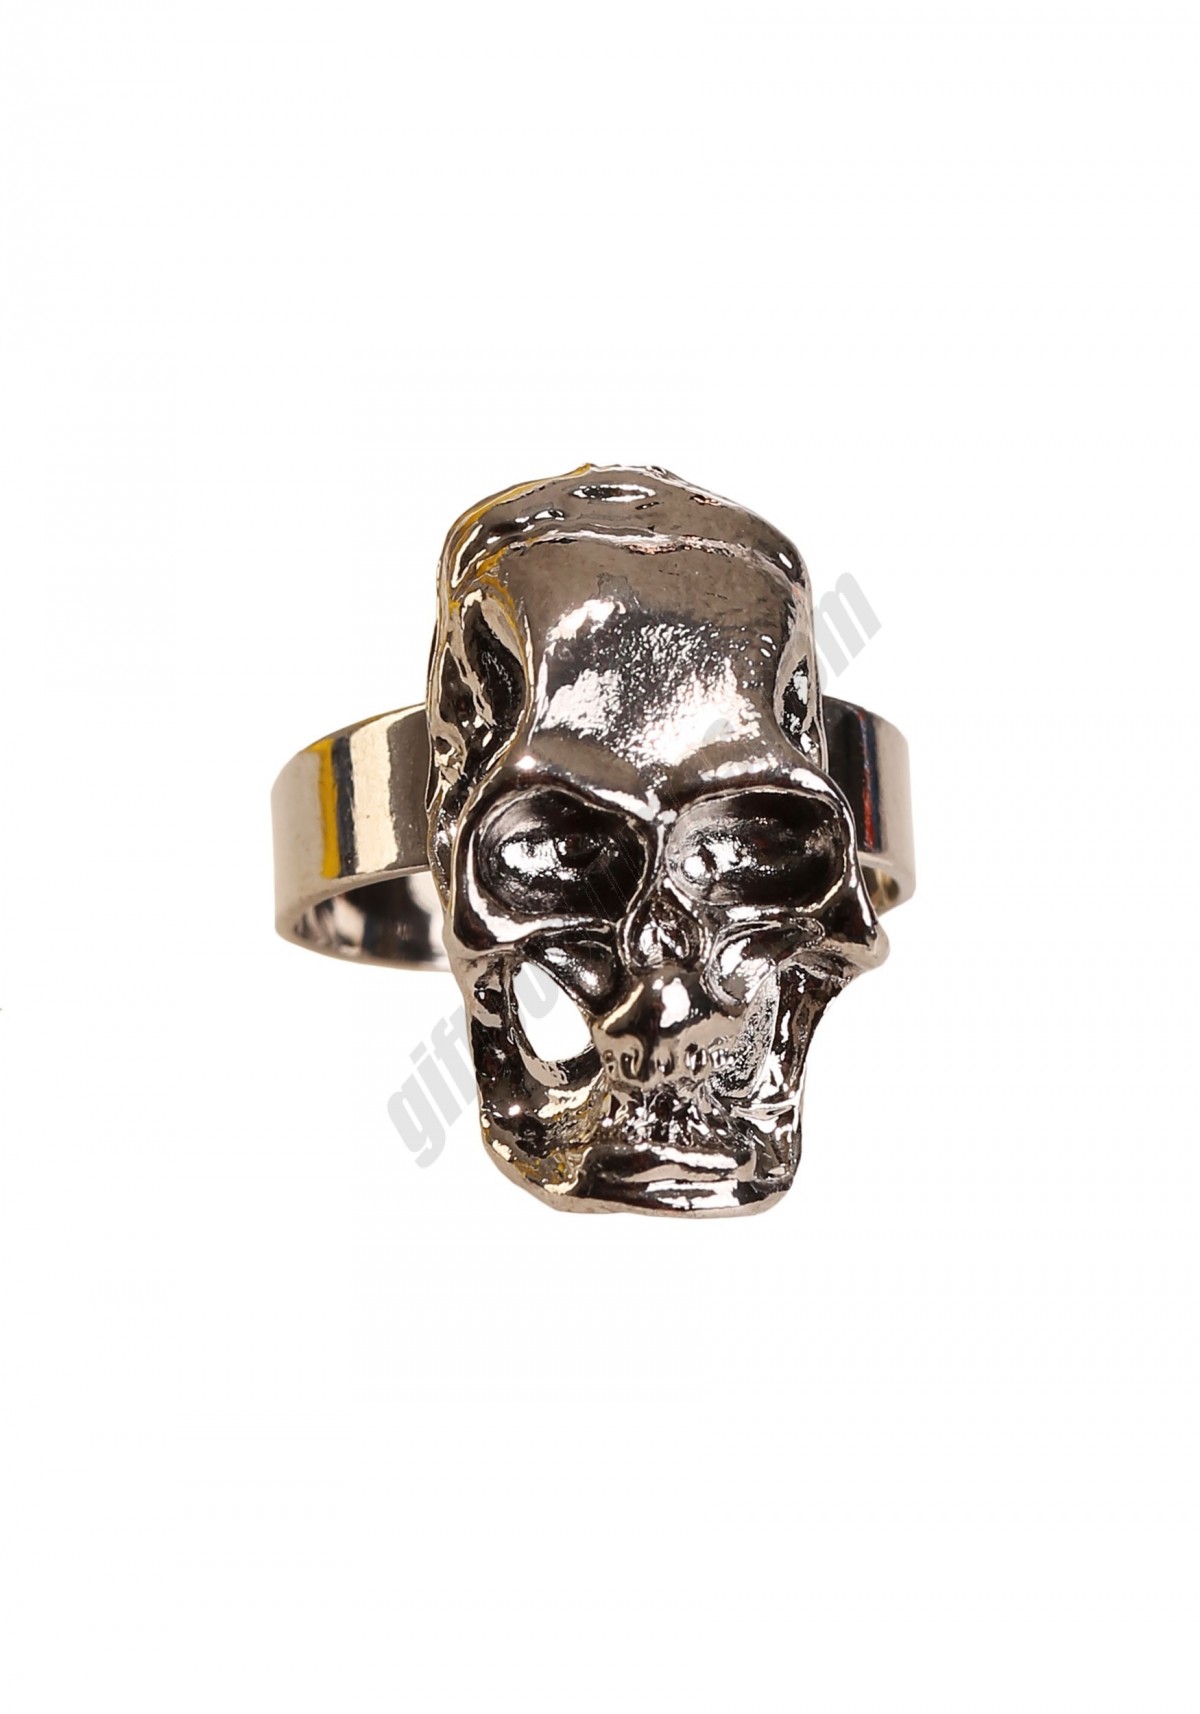 Pirate Skull Ring Promotions - -1